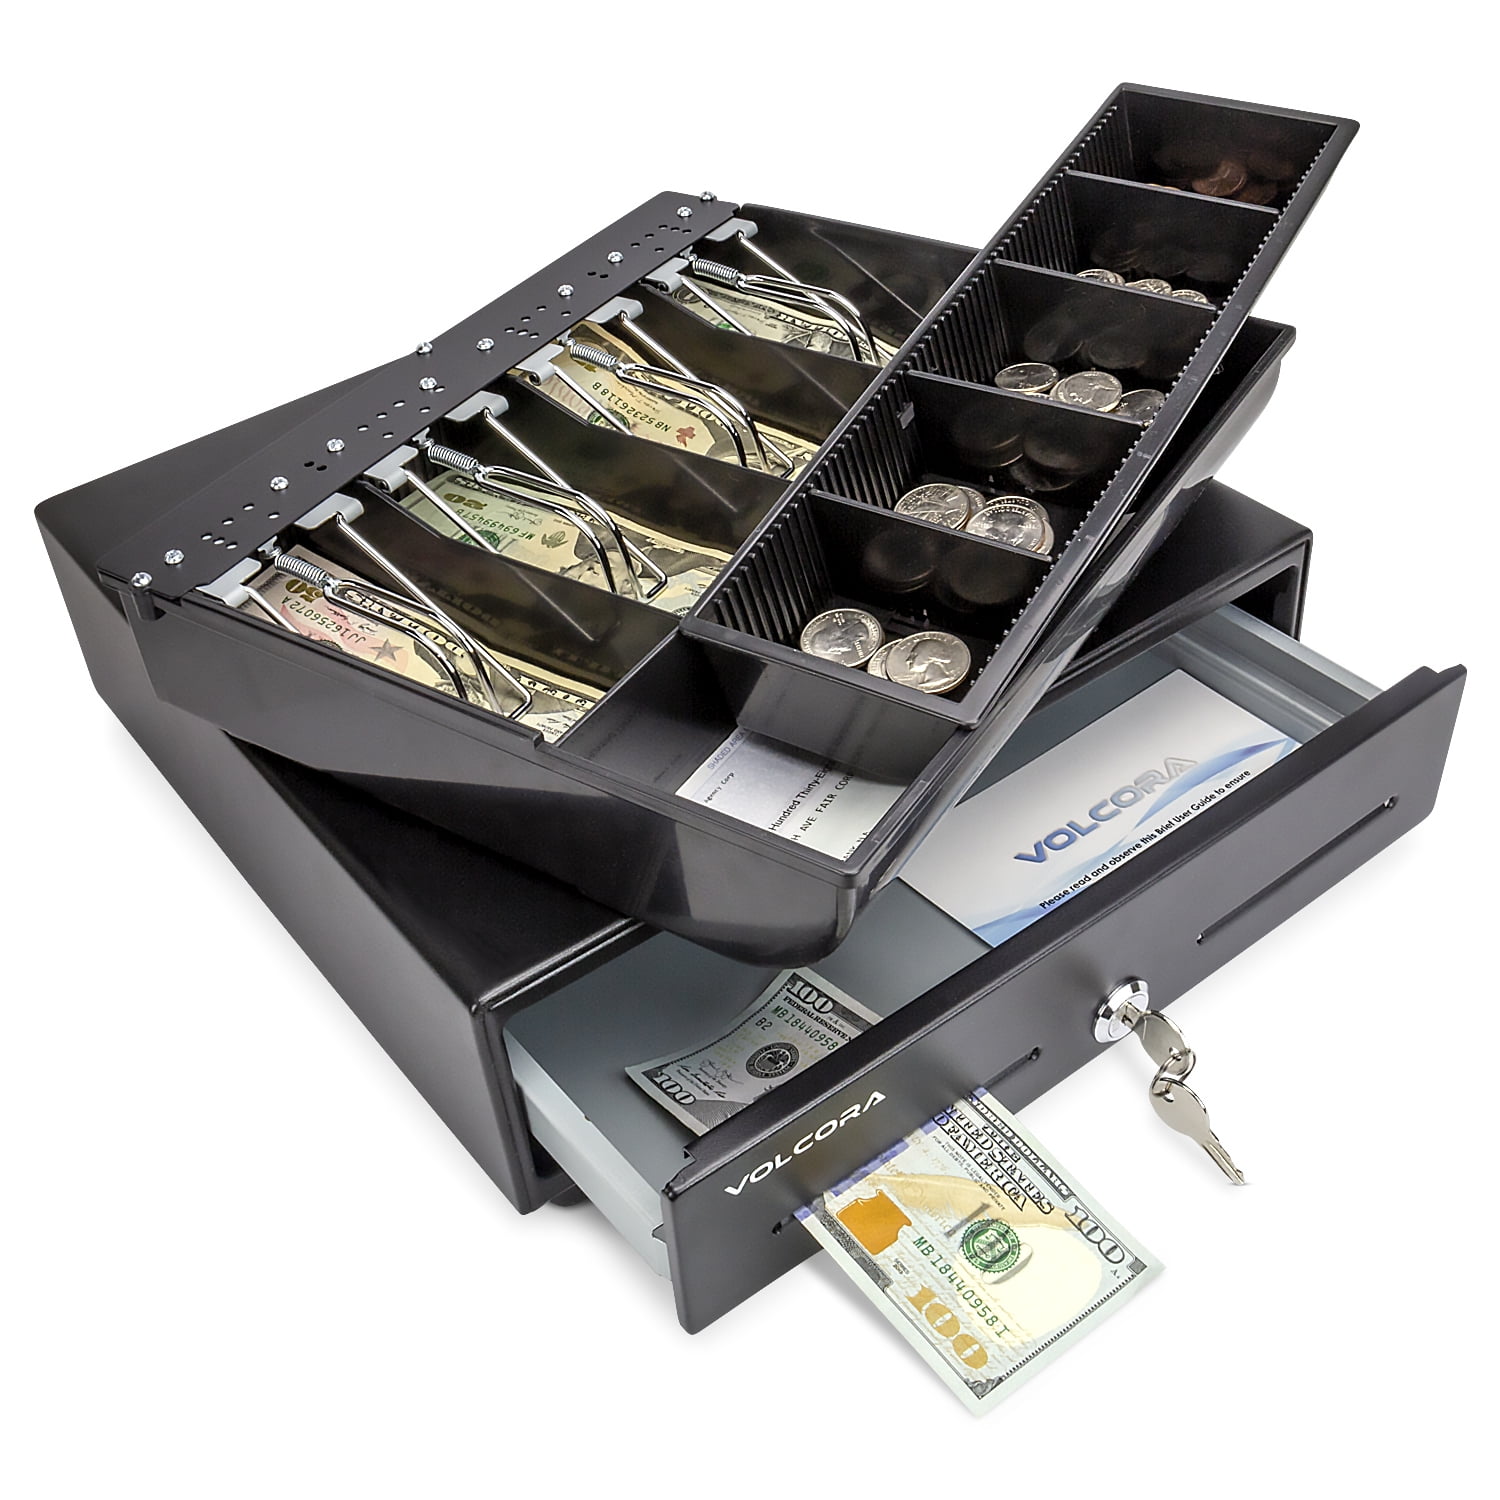 Mini Cash Register Drawer 13” for Point of Sale (POS) System with Fully